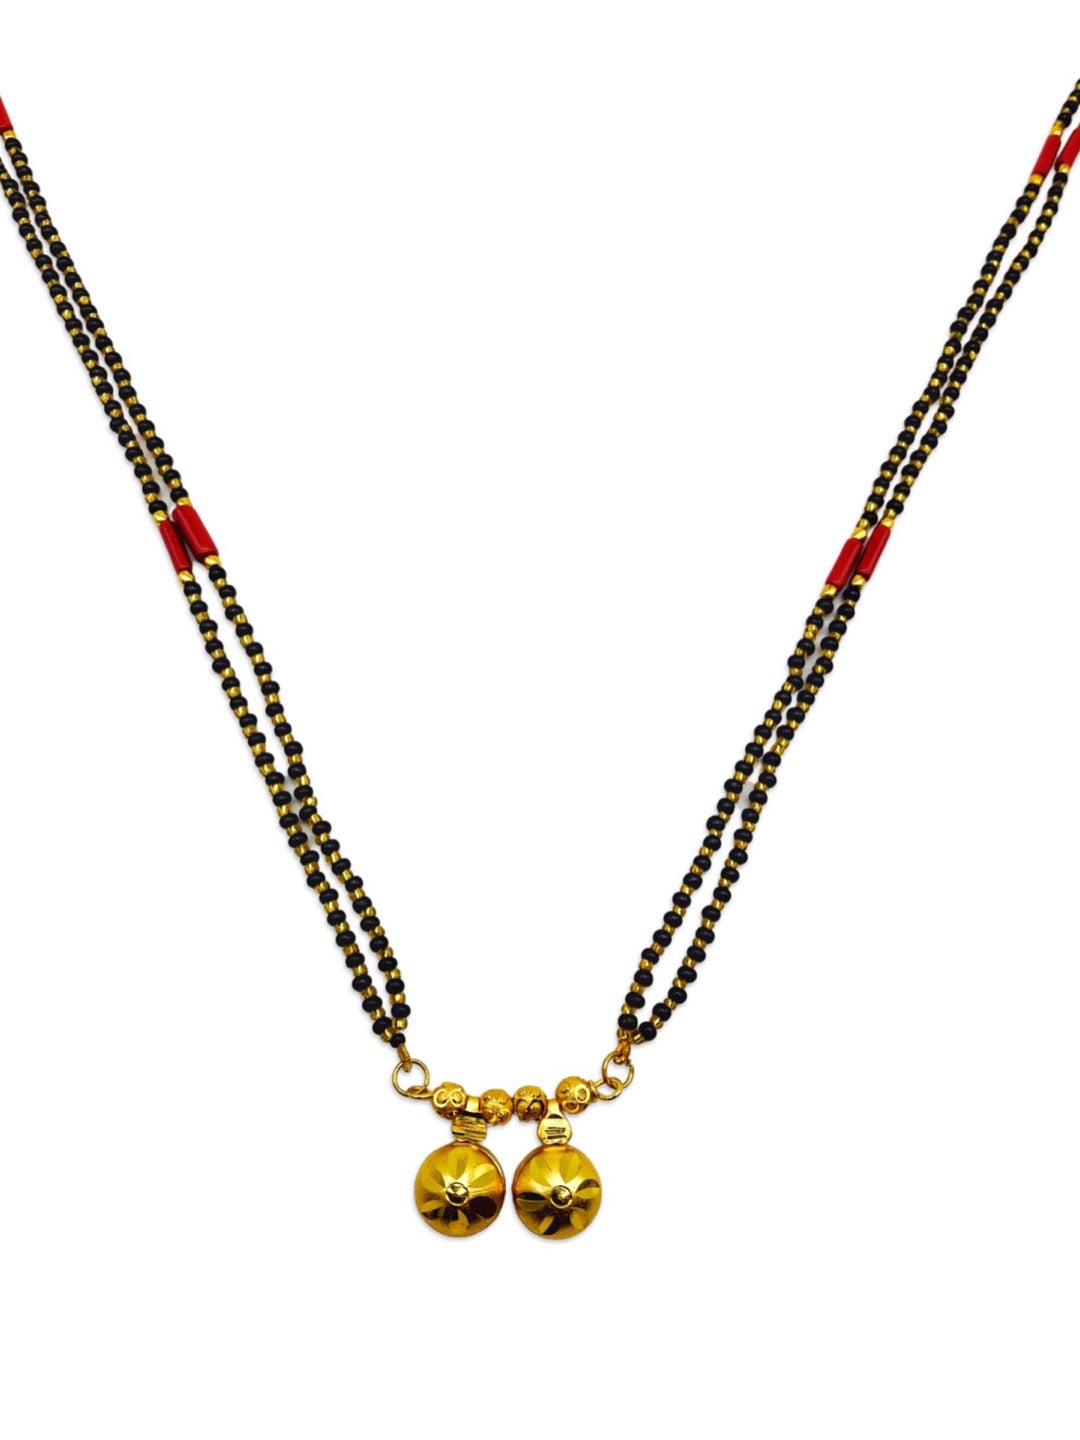 Mangalsutra Designs With Red Beads